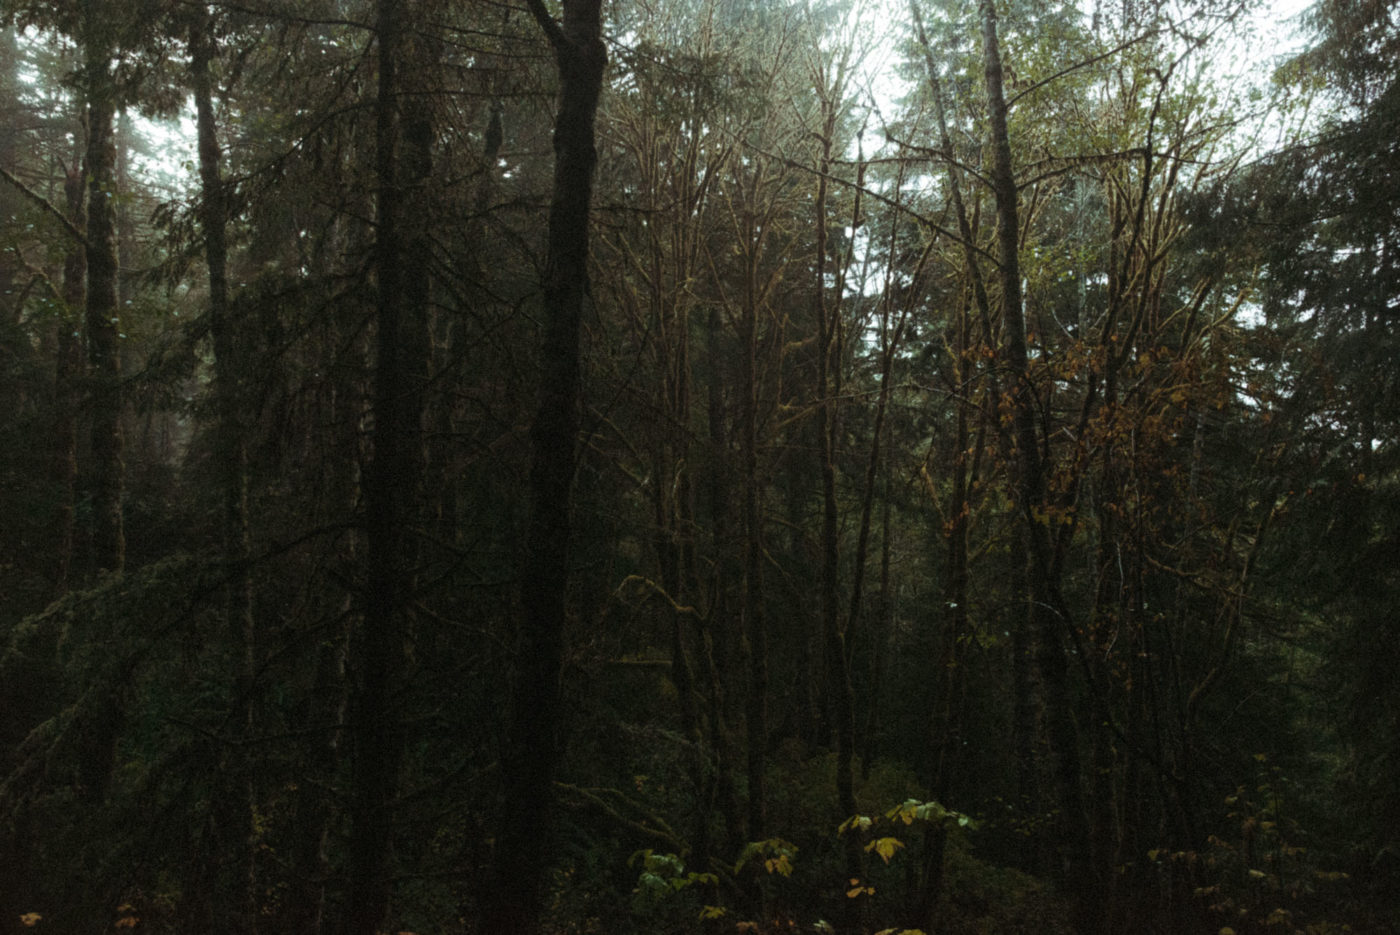 trees in a forest on an overcast day